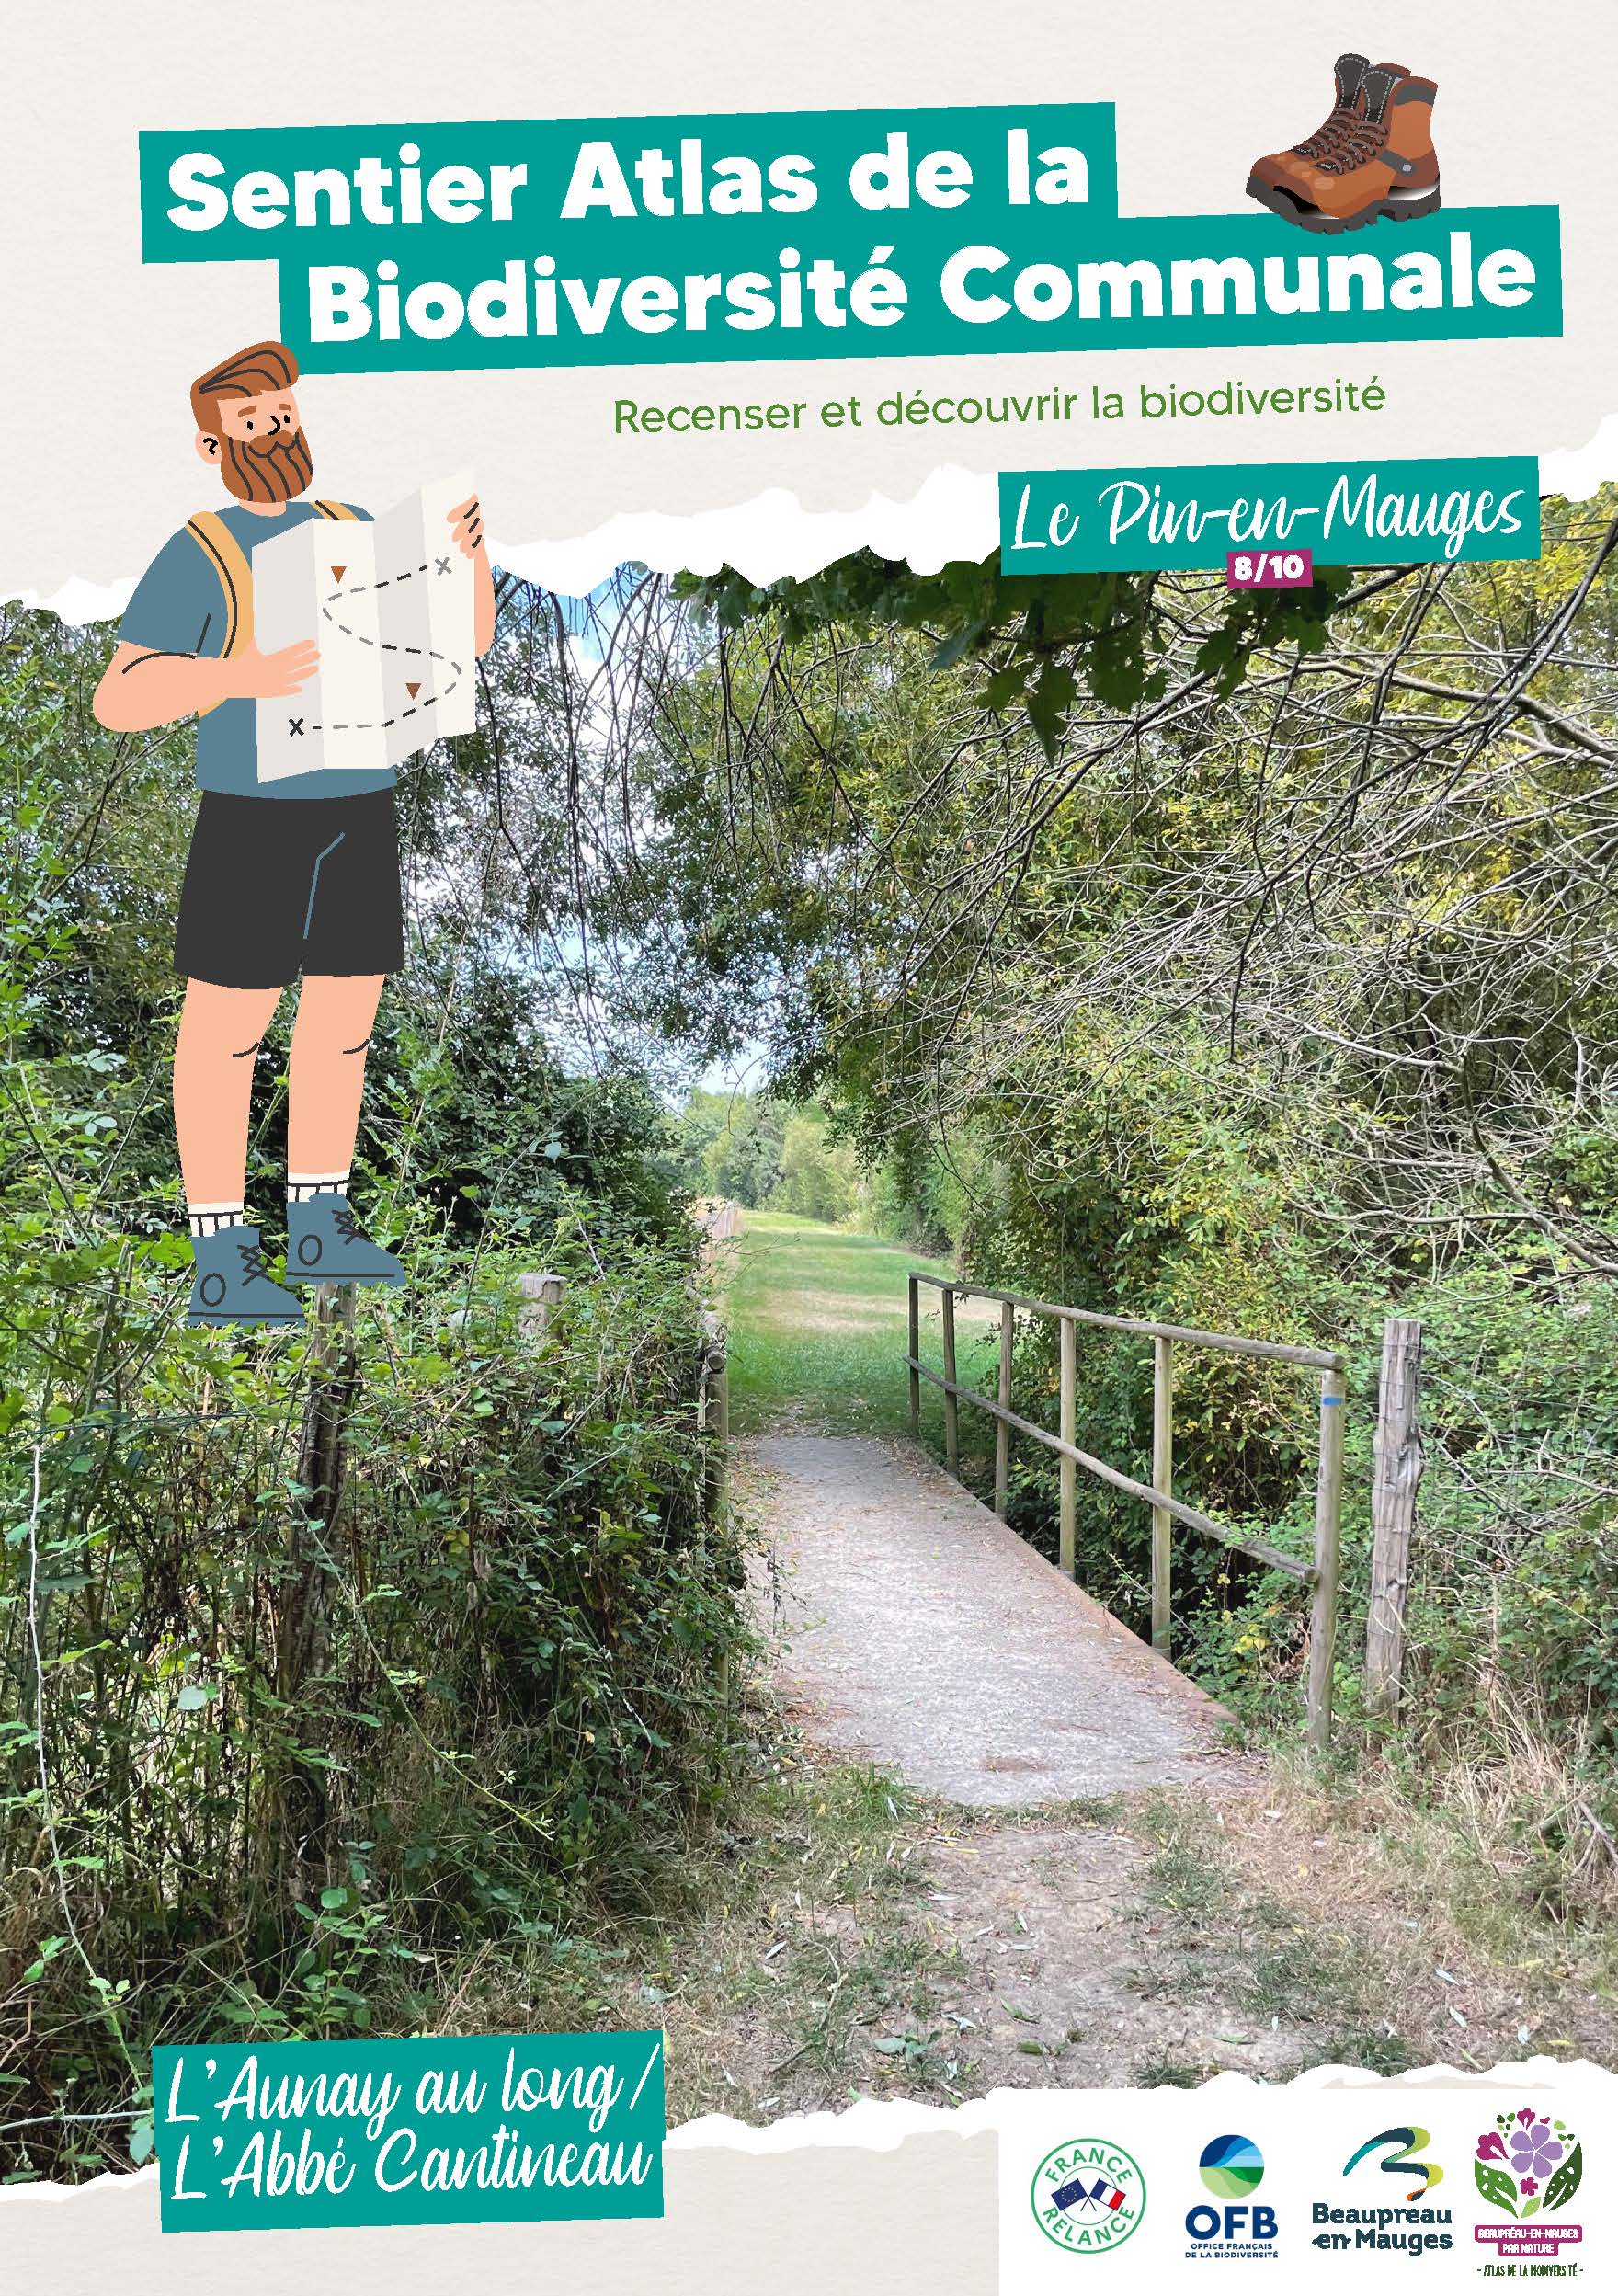 Sentier LePinenMauges Page 1